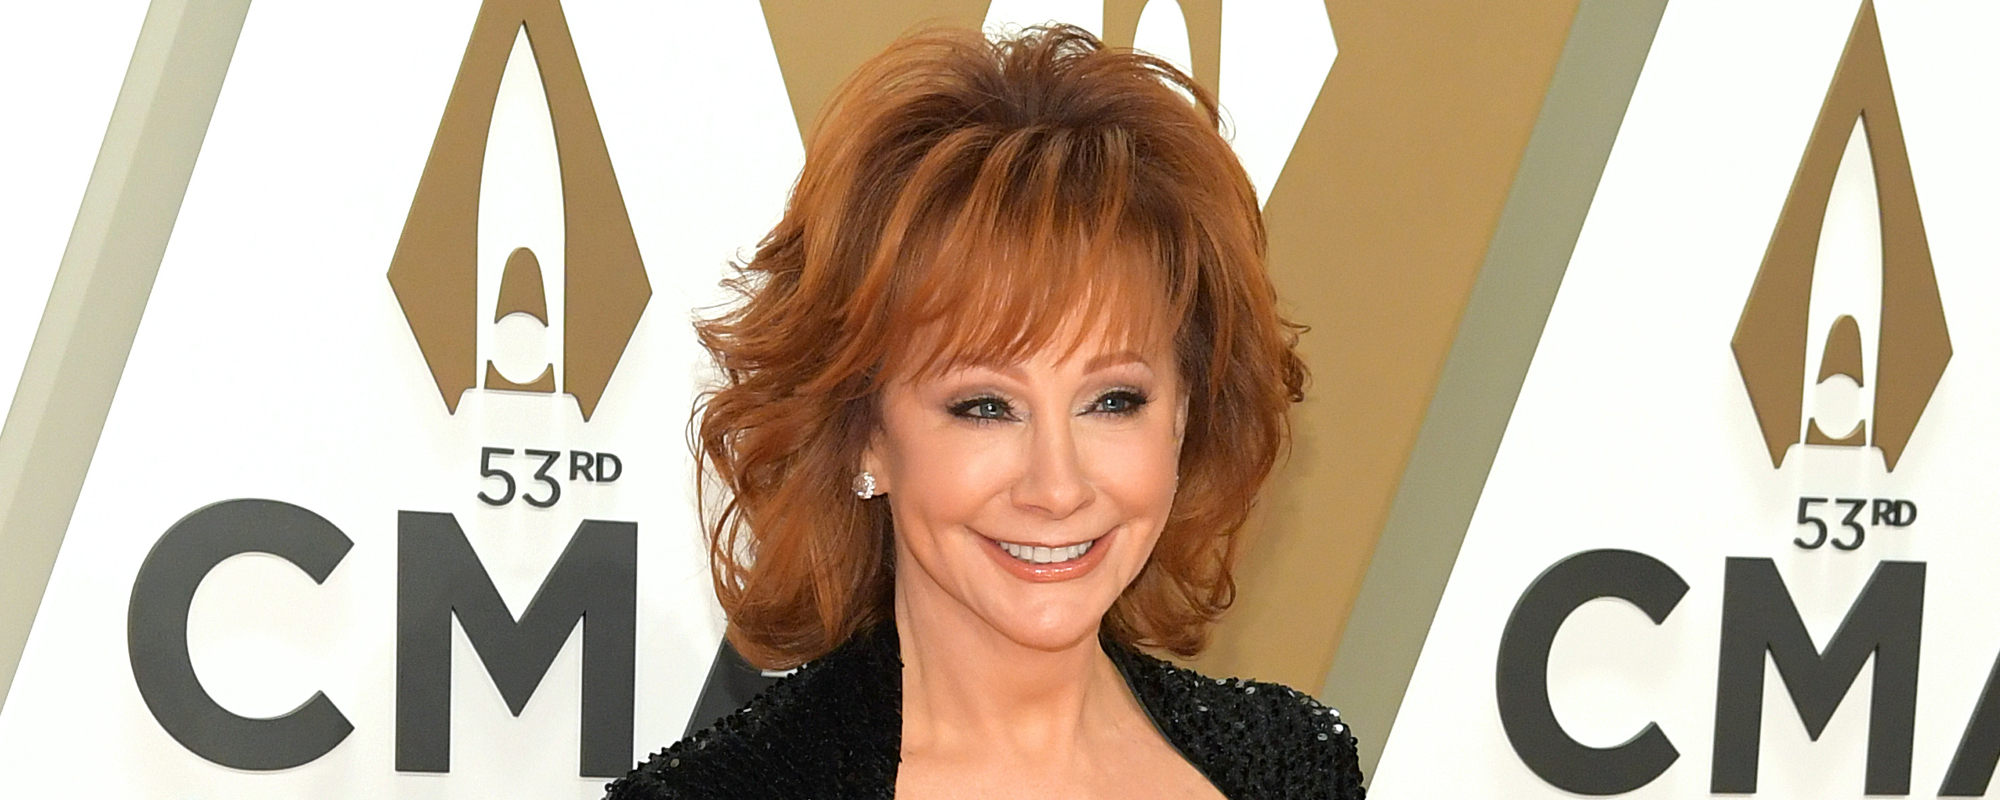 'The Voice' Reba McEntire Offers Some Advice to New Coaches Coming Next Season